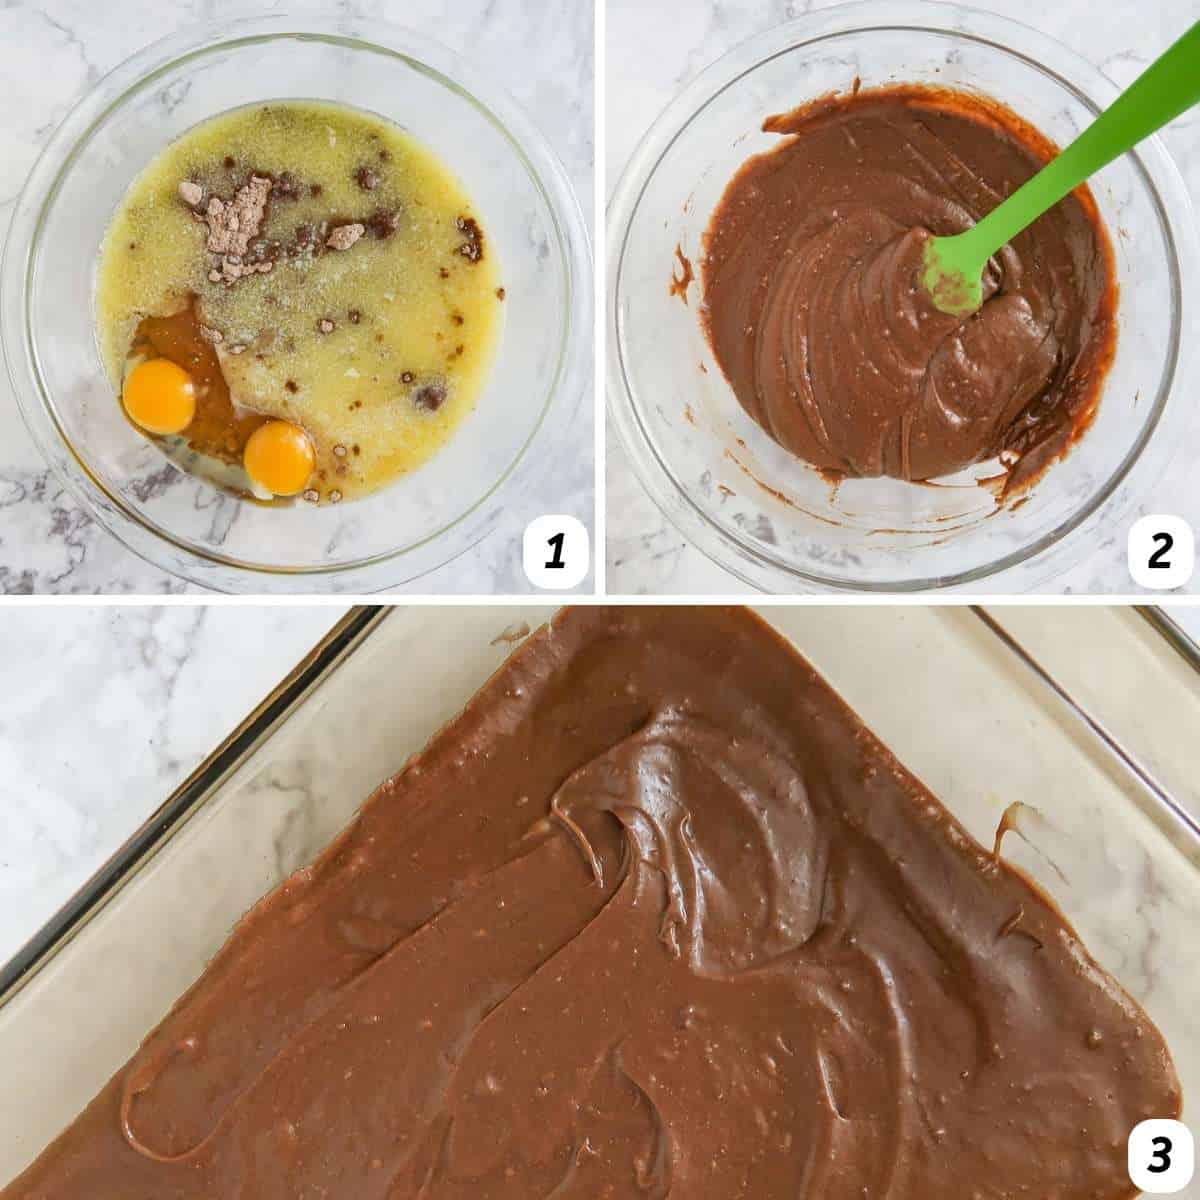 Three panel grid of process shots 1-3 - combining ingredients to make brownie batter and pouring about ½ of batter into a pan.